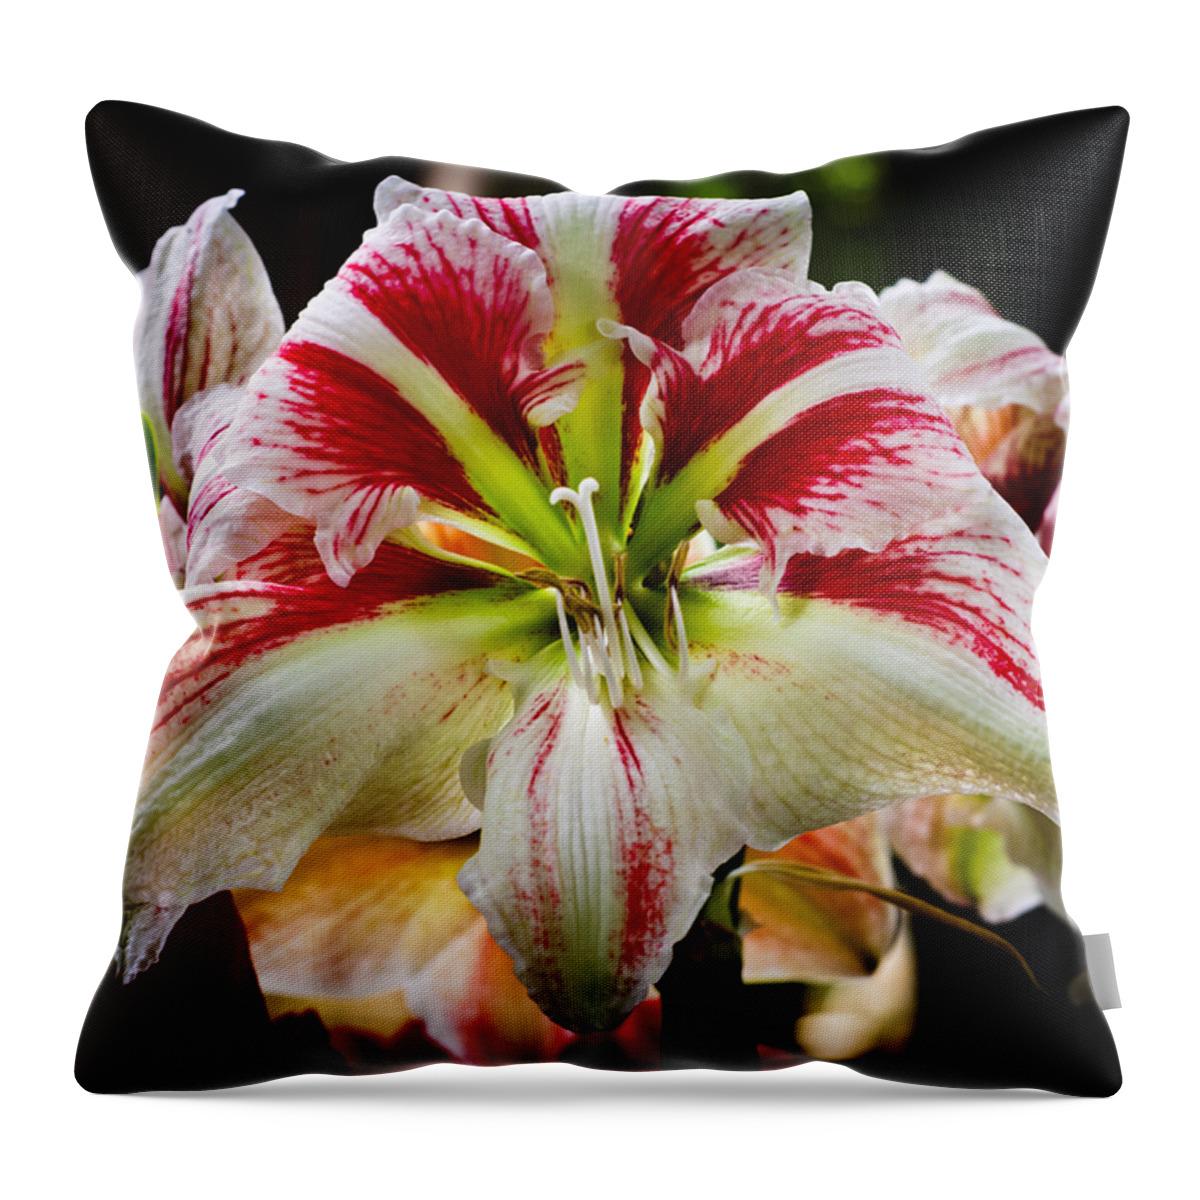 Amaryllis Throw Pillow featuring the photograph Sweet Like Candy by Christi Kraft